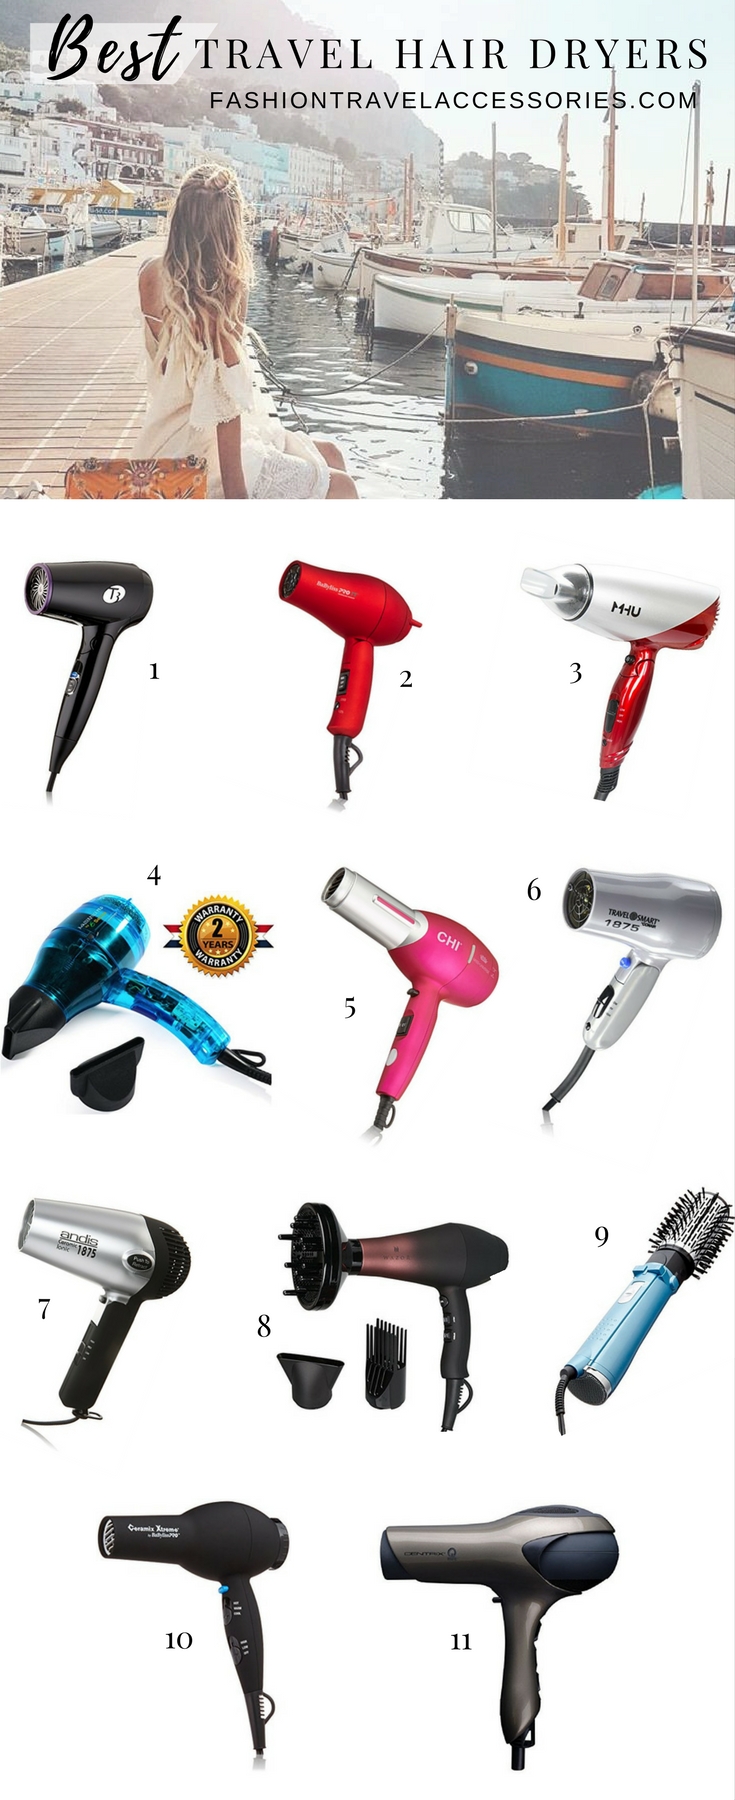 Best Travel Hair Dryers Fashion Travel Accessories Fast Drying Portable Compact Quiet Powerful 1